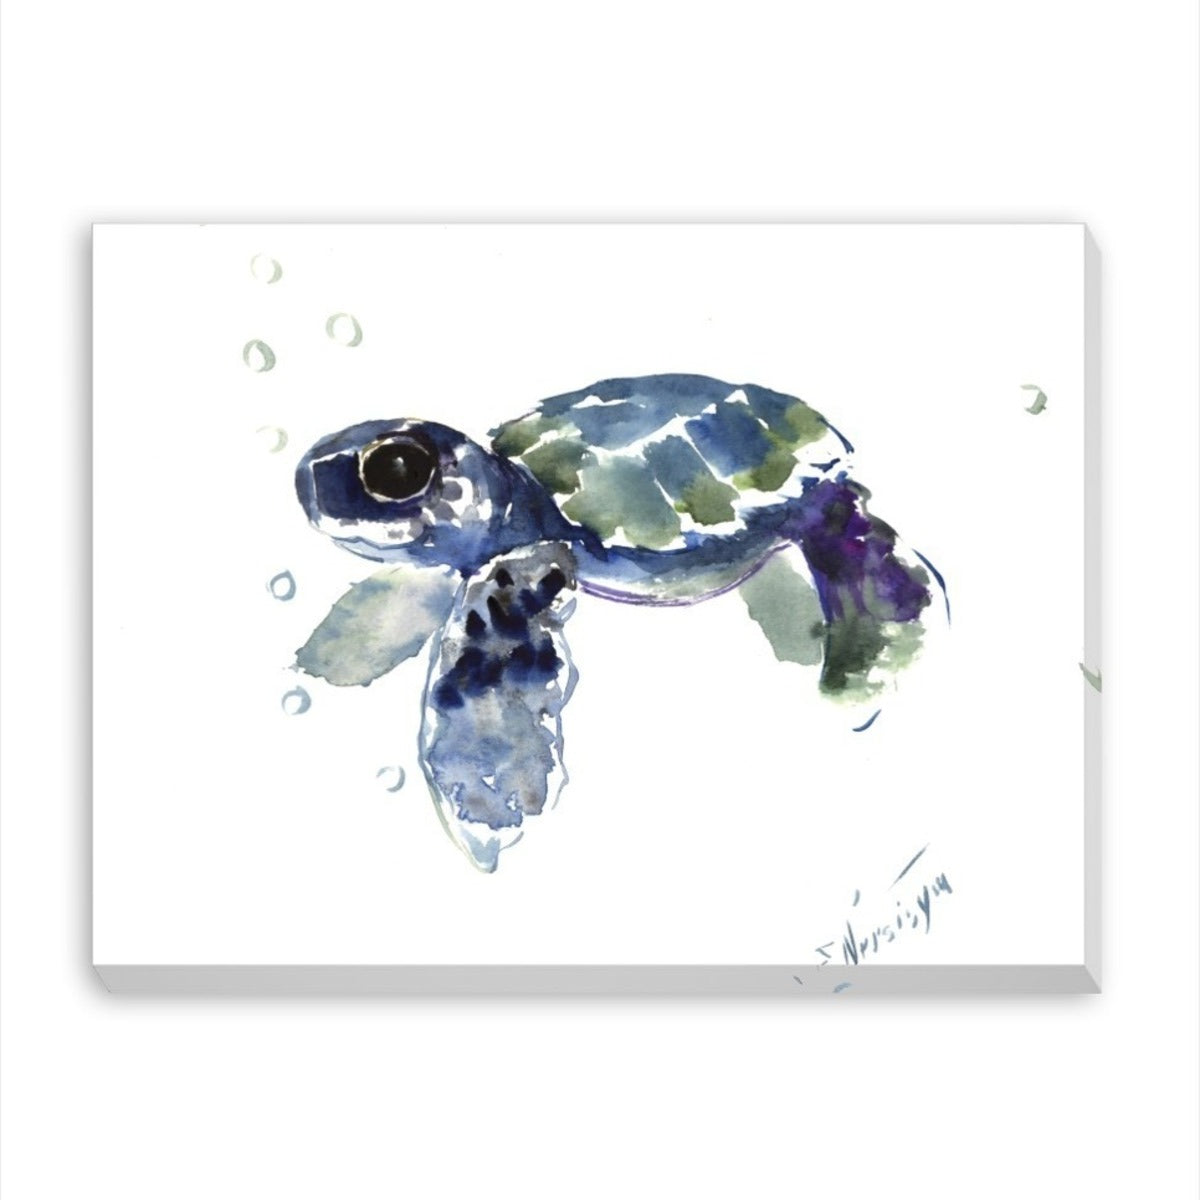 Babe Sea Turtle by Suren Nersisyan Art Wrapped Canvas - Americanflat